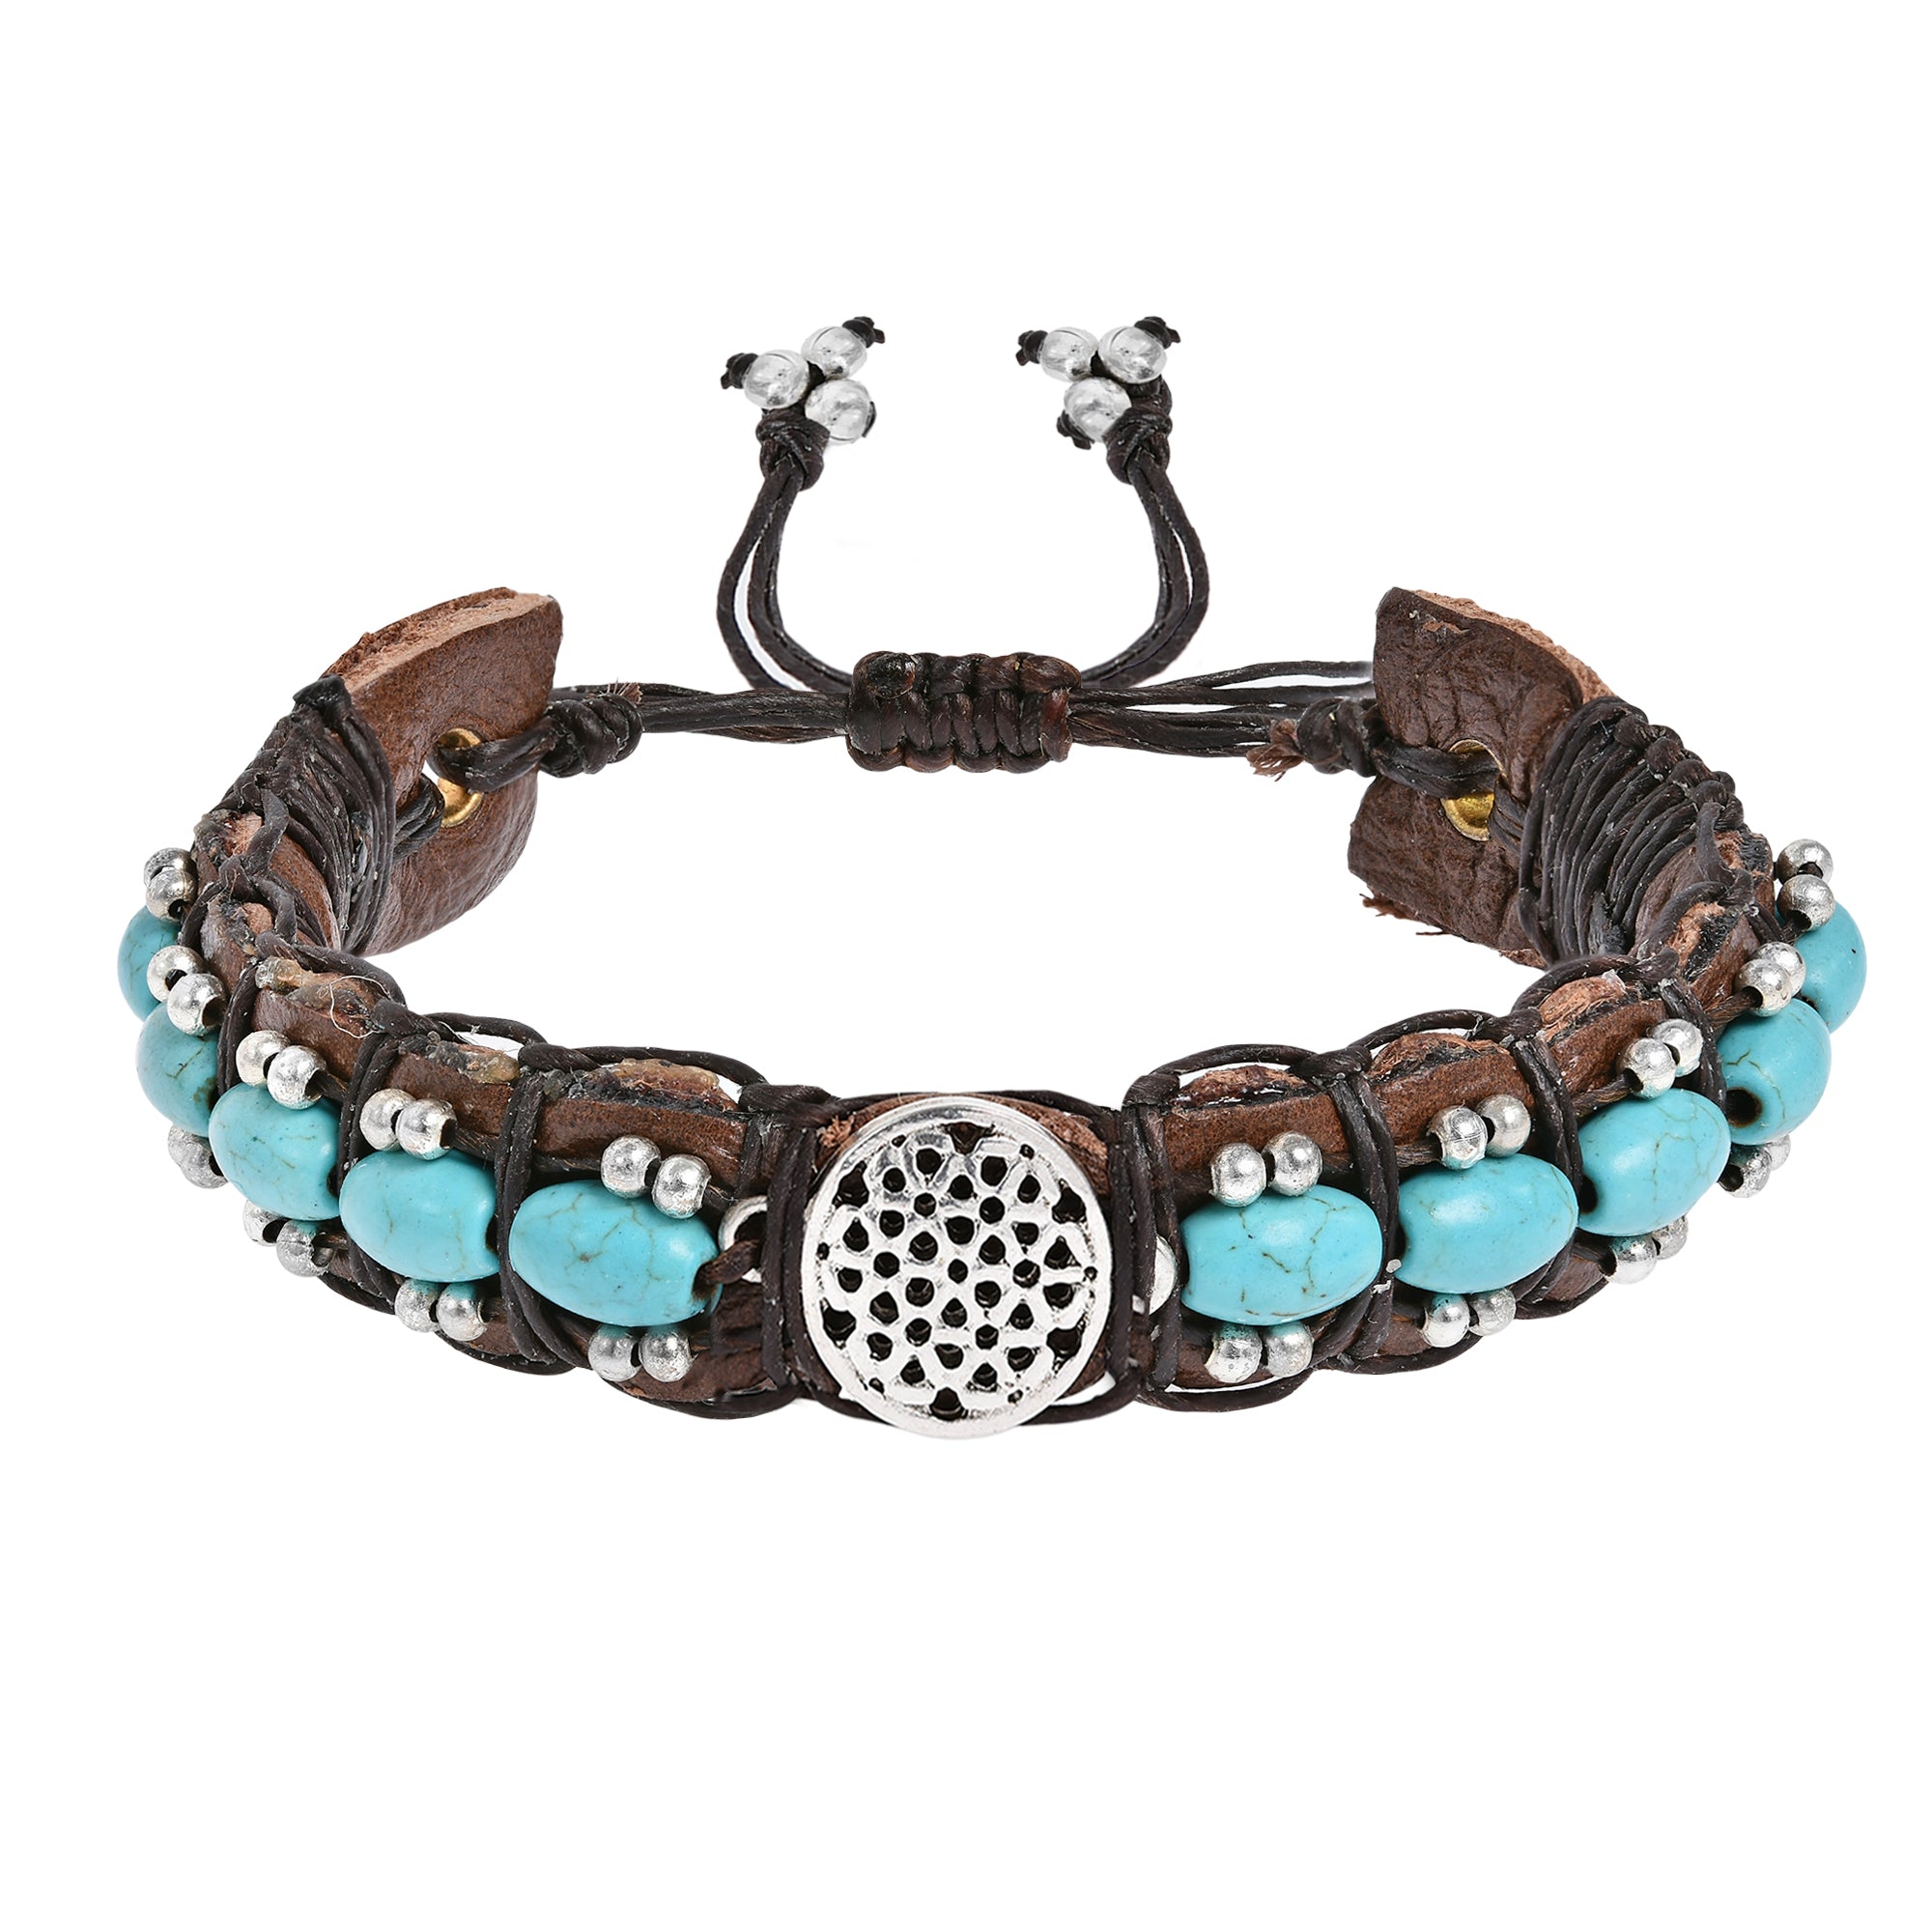 Handcrafted Inspirational Flower of Life Leather Bracelet w/ Turquoise Stones